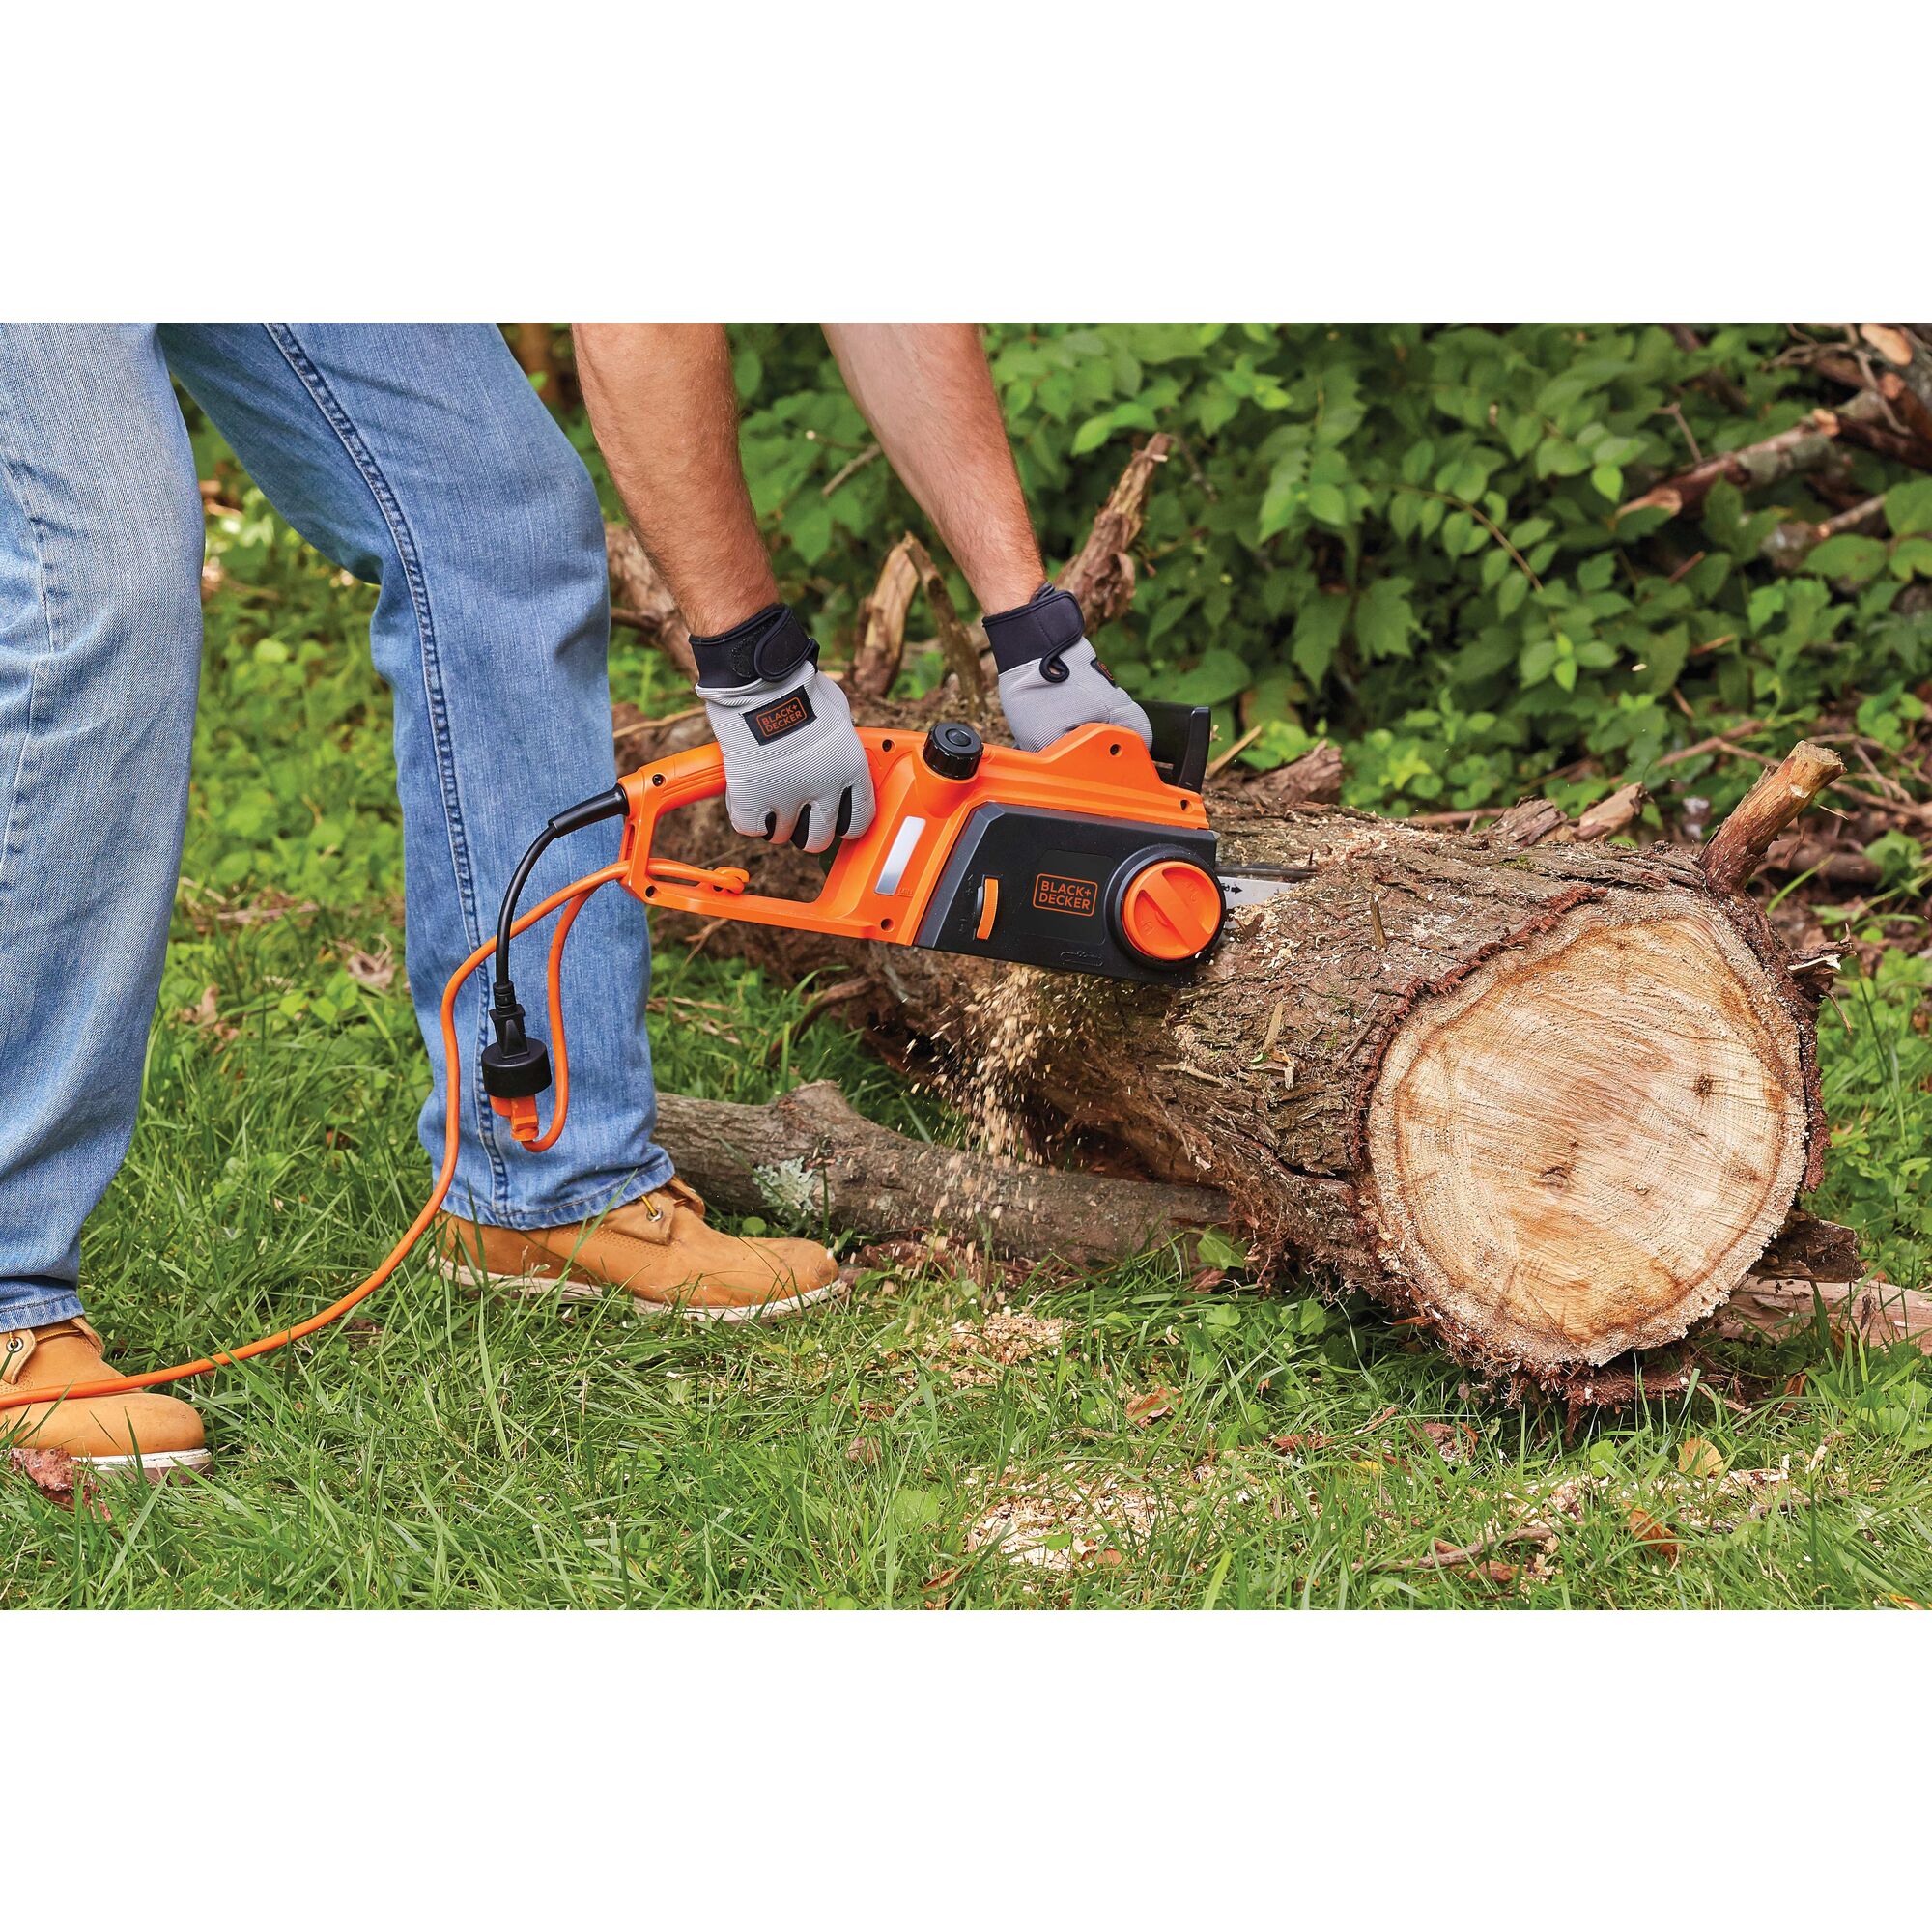 12 Amp 16 inch Chainsaw being used for cutting log of wood.